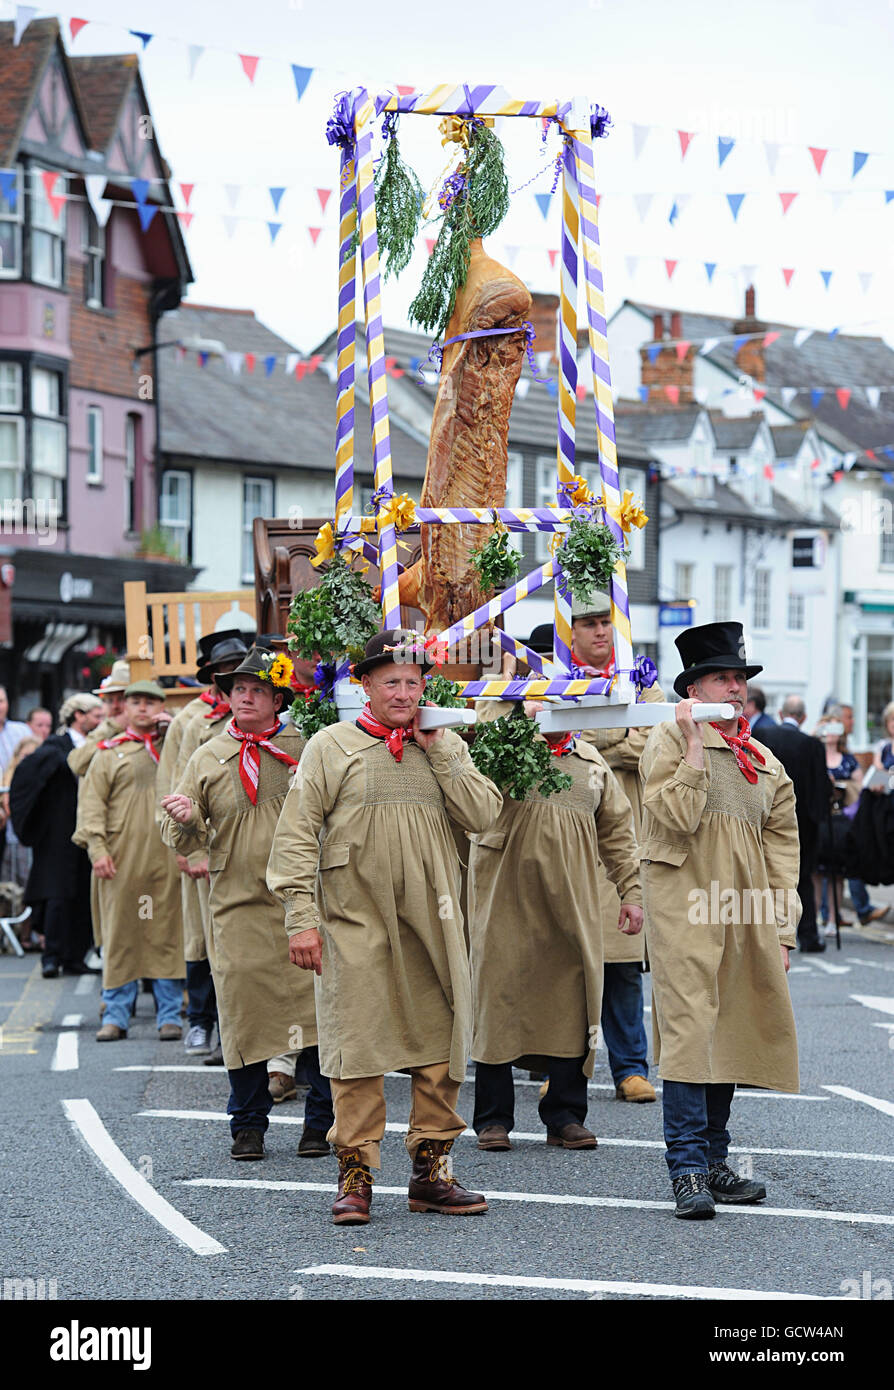 Flitch bearers carry the flitch during the Dunmow Flitch trials in Great Dunmow, Essex, a tradition that goes back to the early 12th century, where successful couples take an oath and are presented with a flitch of bacon. Stock Photo